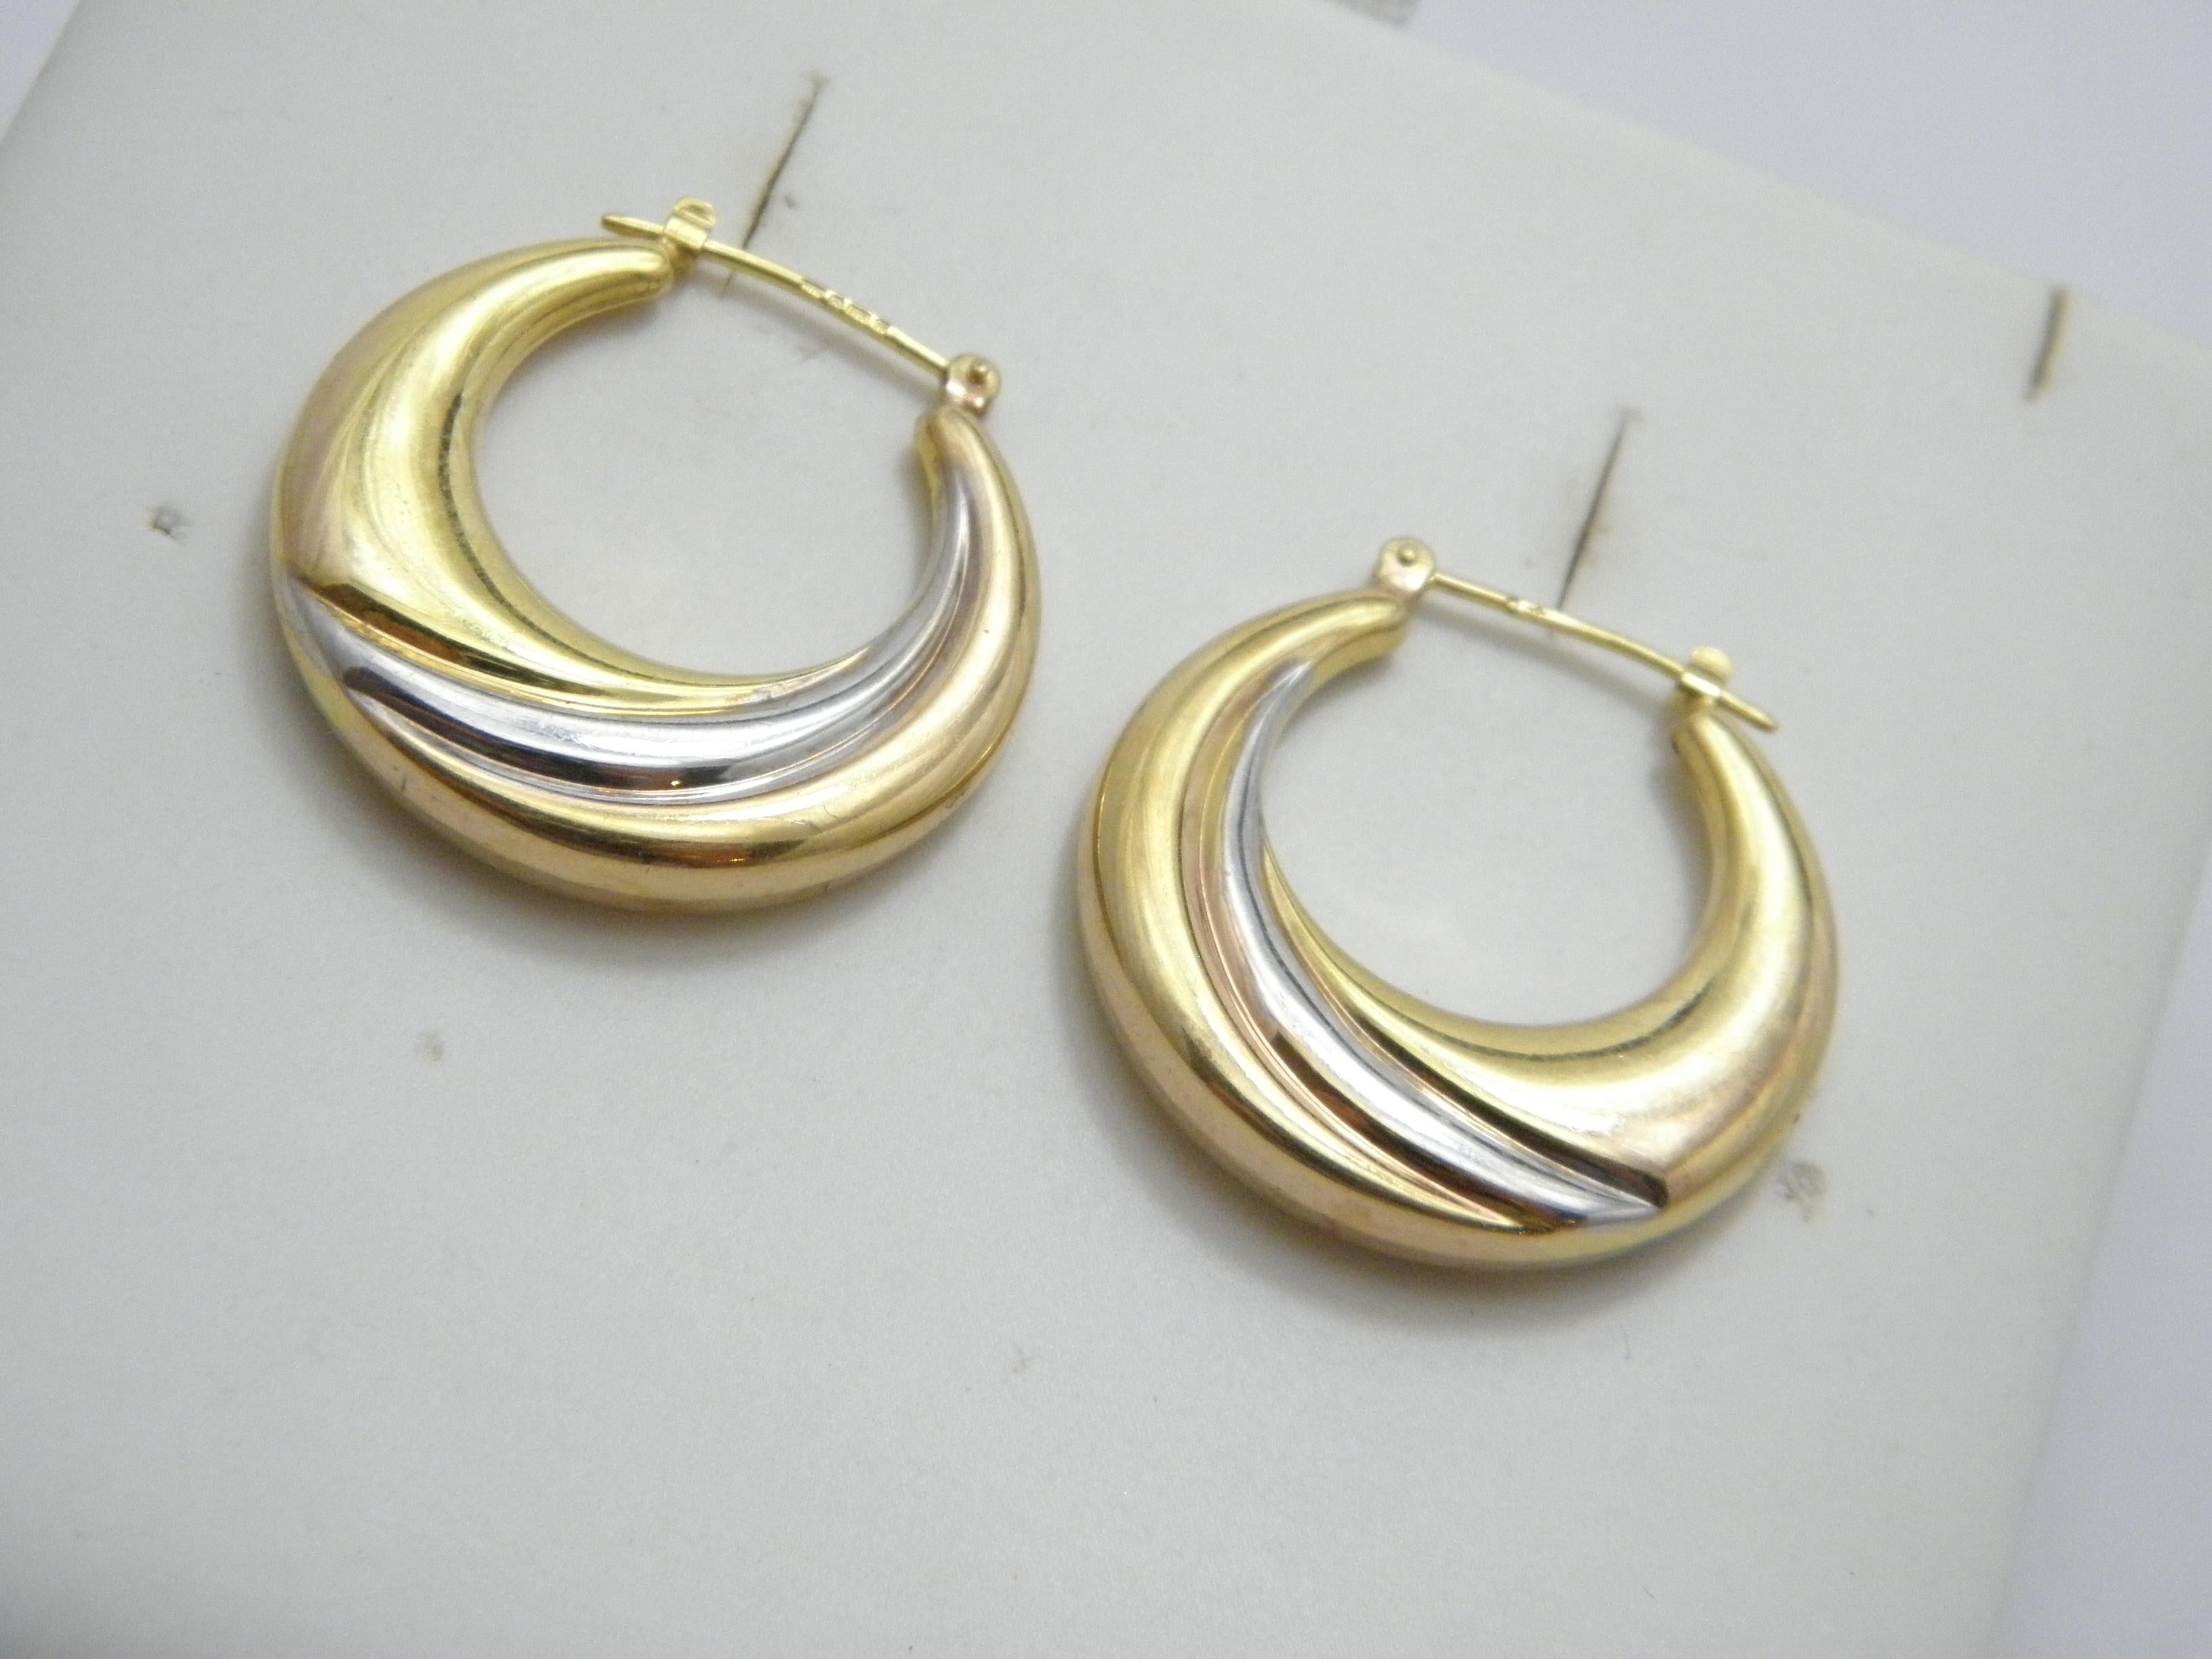 A very special item for you to consider:

9CT 3 TONE GOLD LARGE HOOP DANGLE EARRINGS

DETAILS
Material: 375/1000 9ct Solid Gold (Yellow with white and rose accents)
Style: Detailed hoop / dangle earrings with classic Huggie design
Fastening: Lever